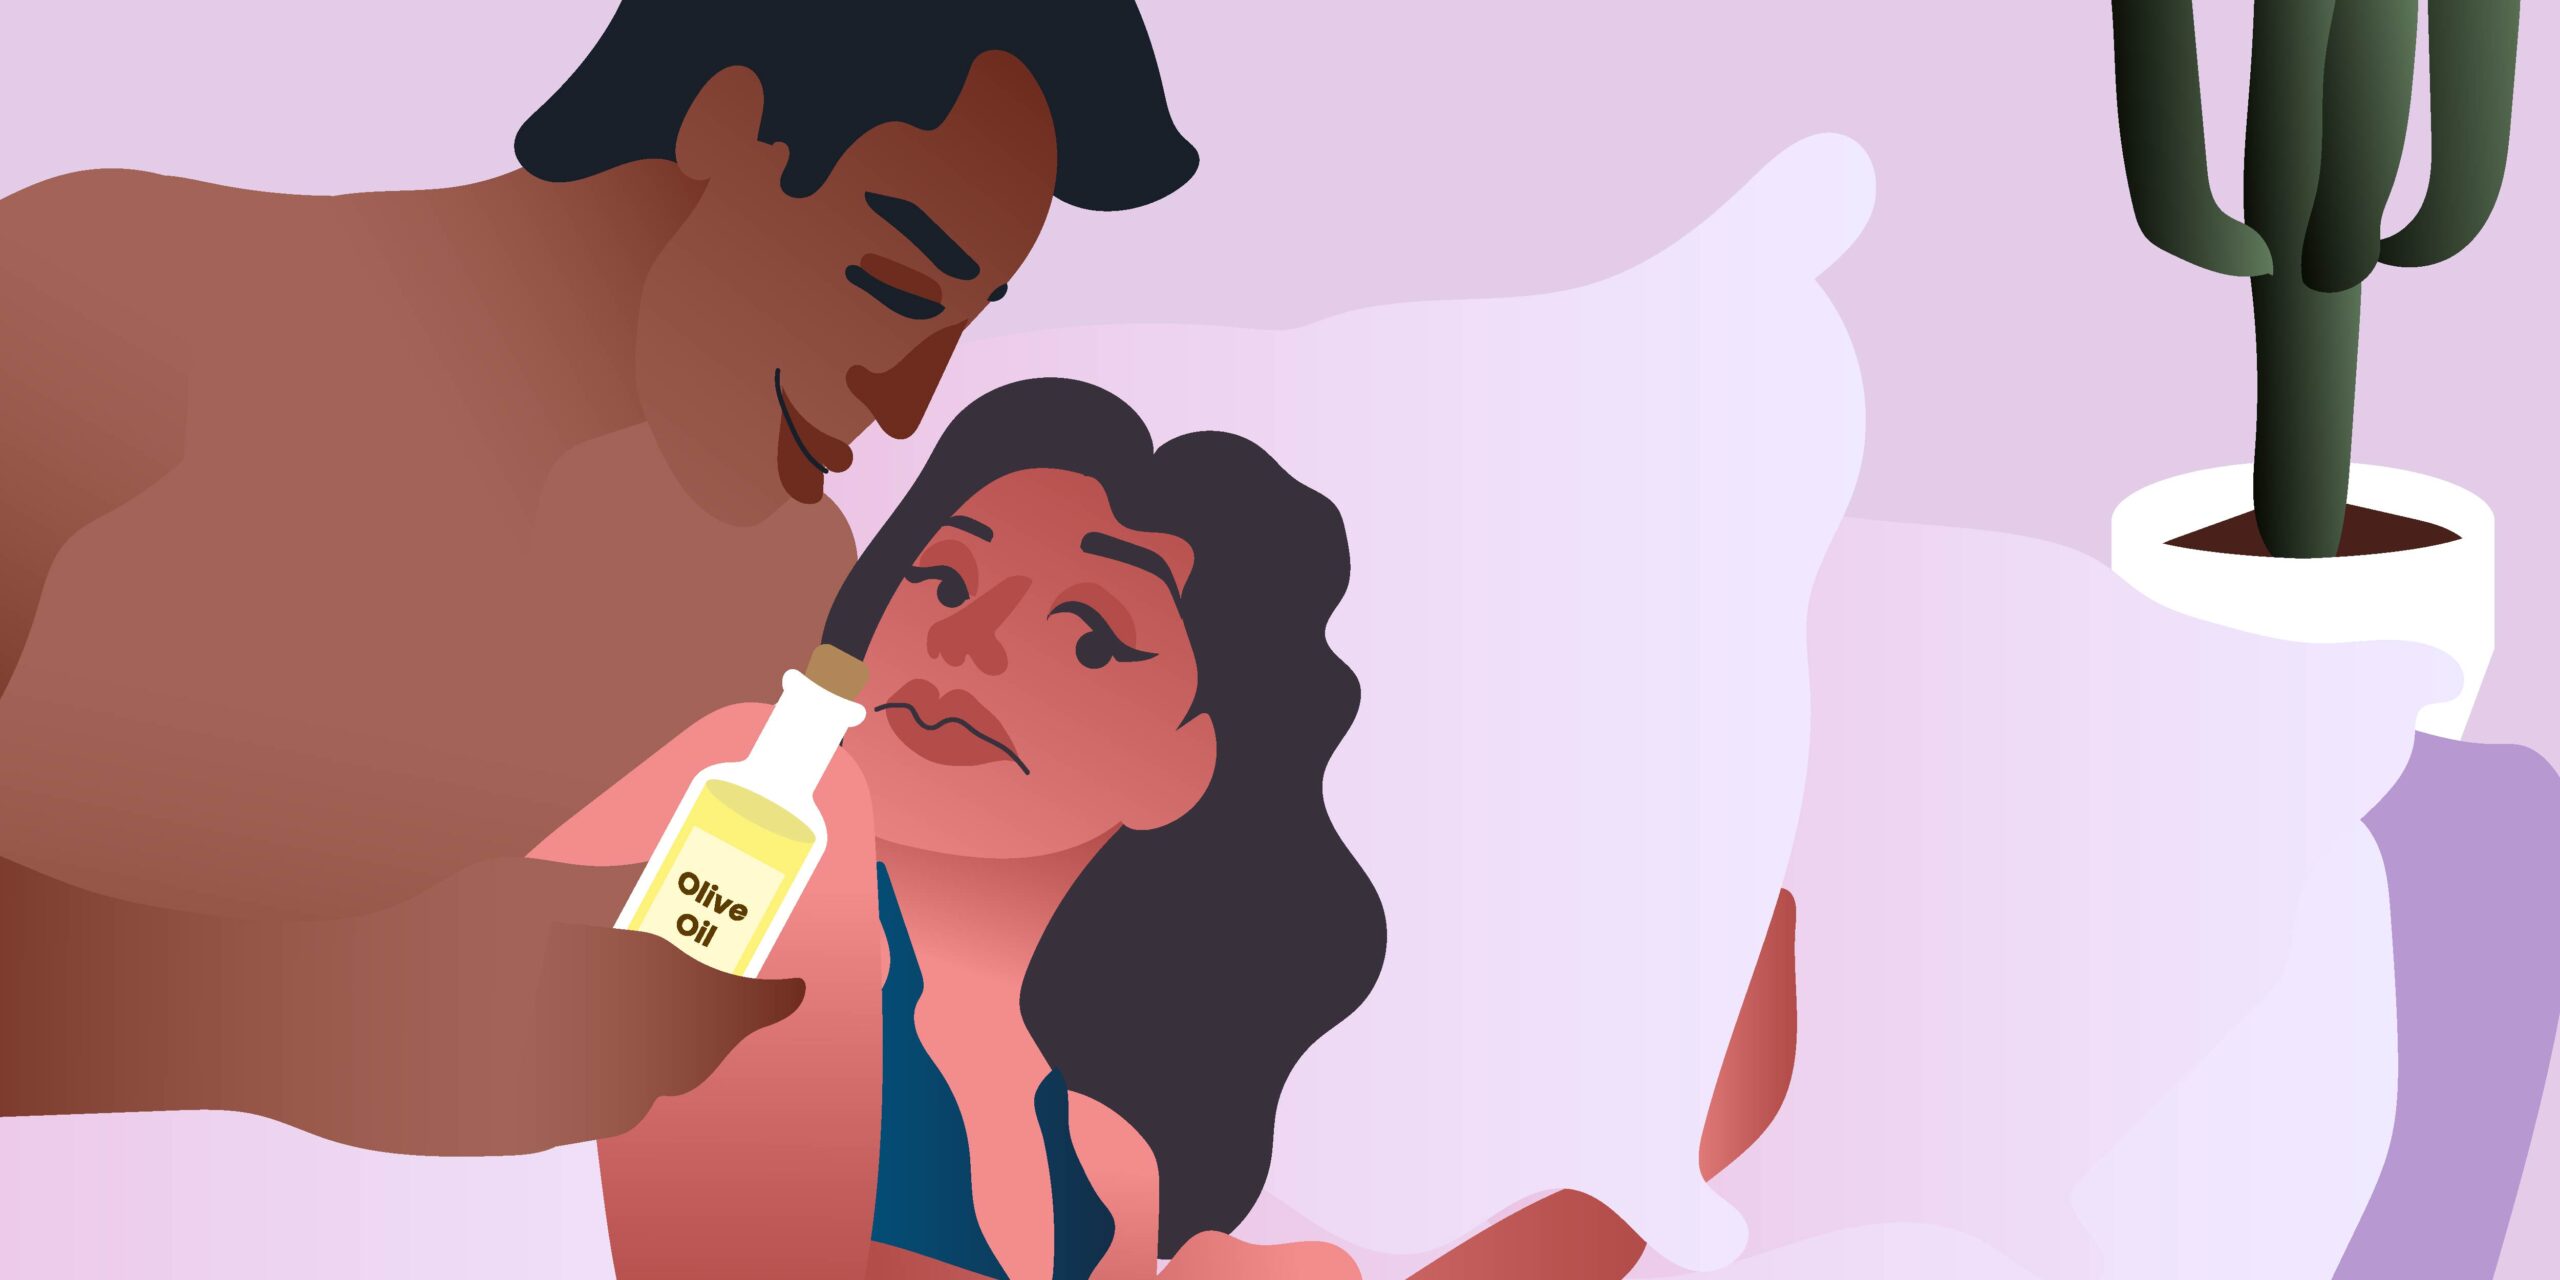 Olive Oil as Lube: Risque or Risky Alternative?